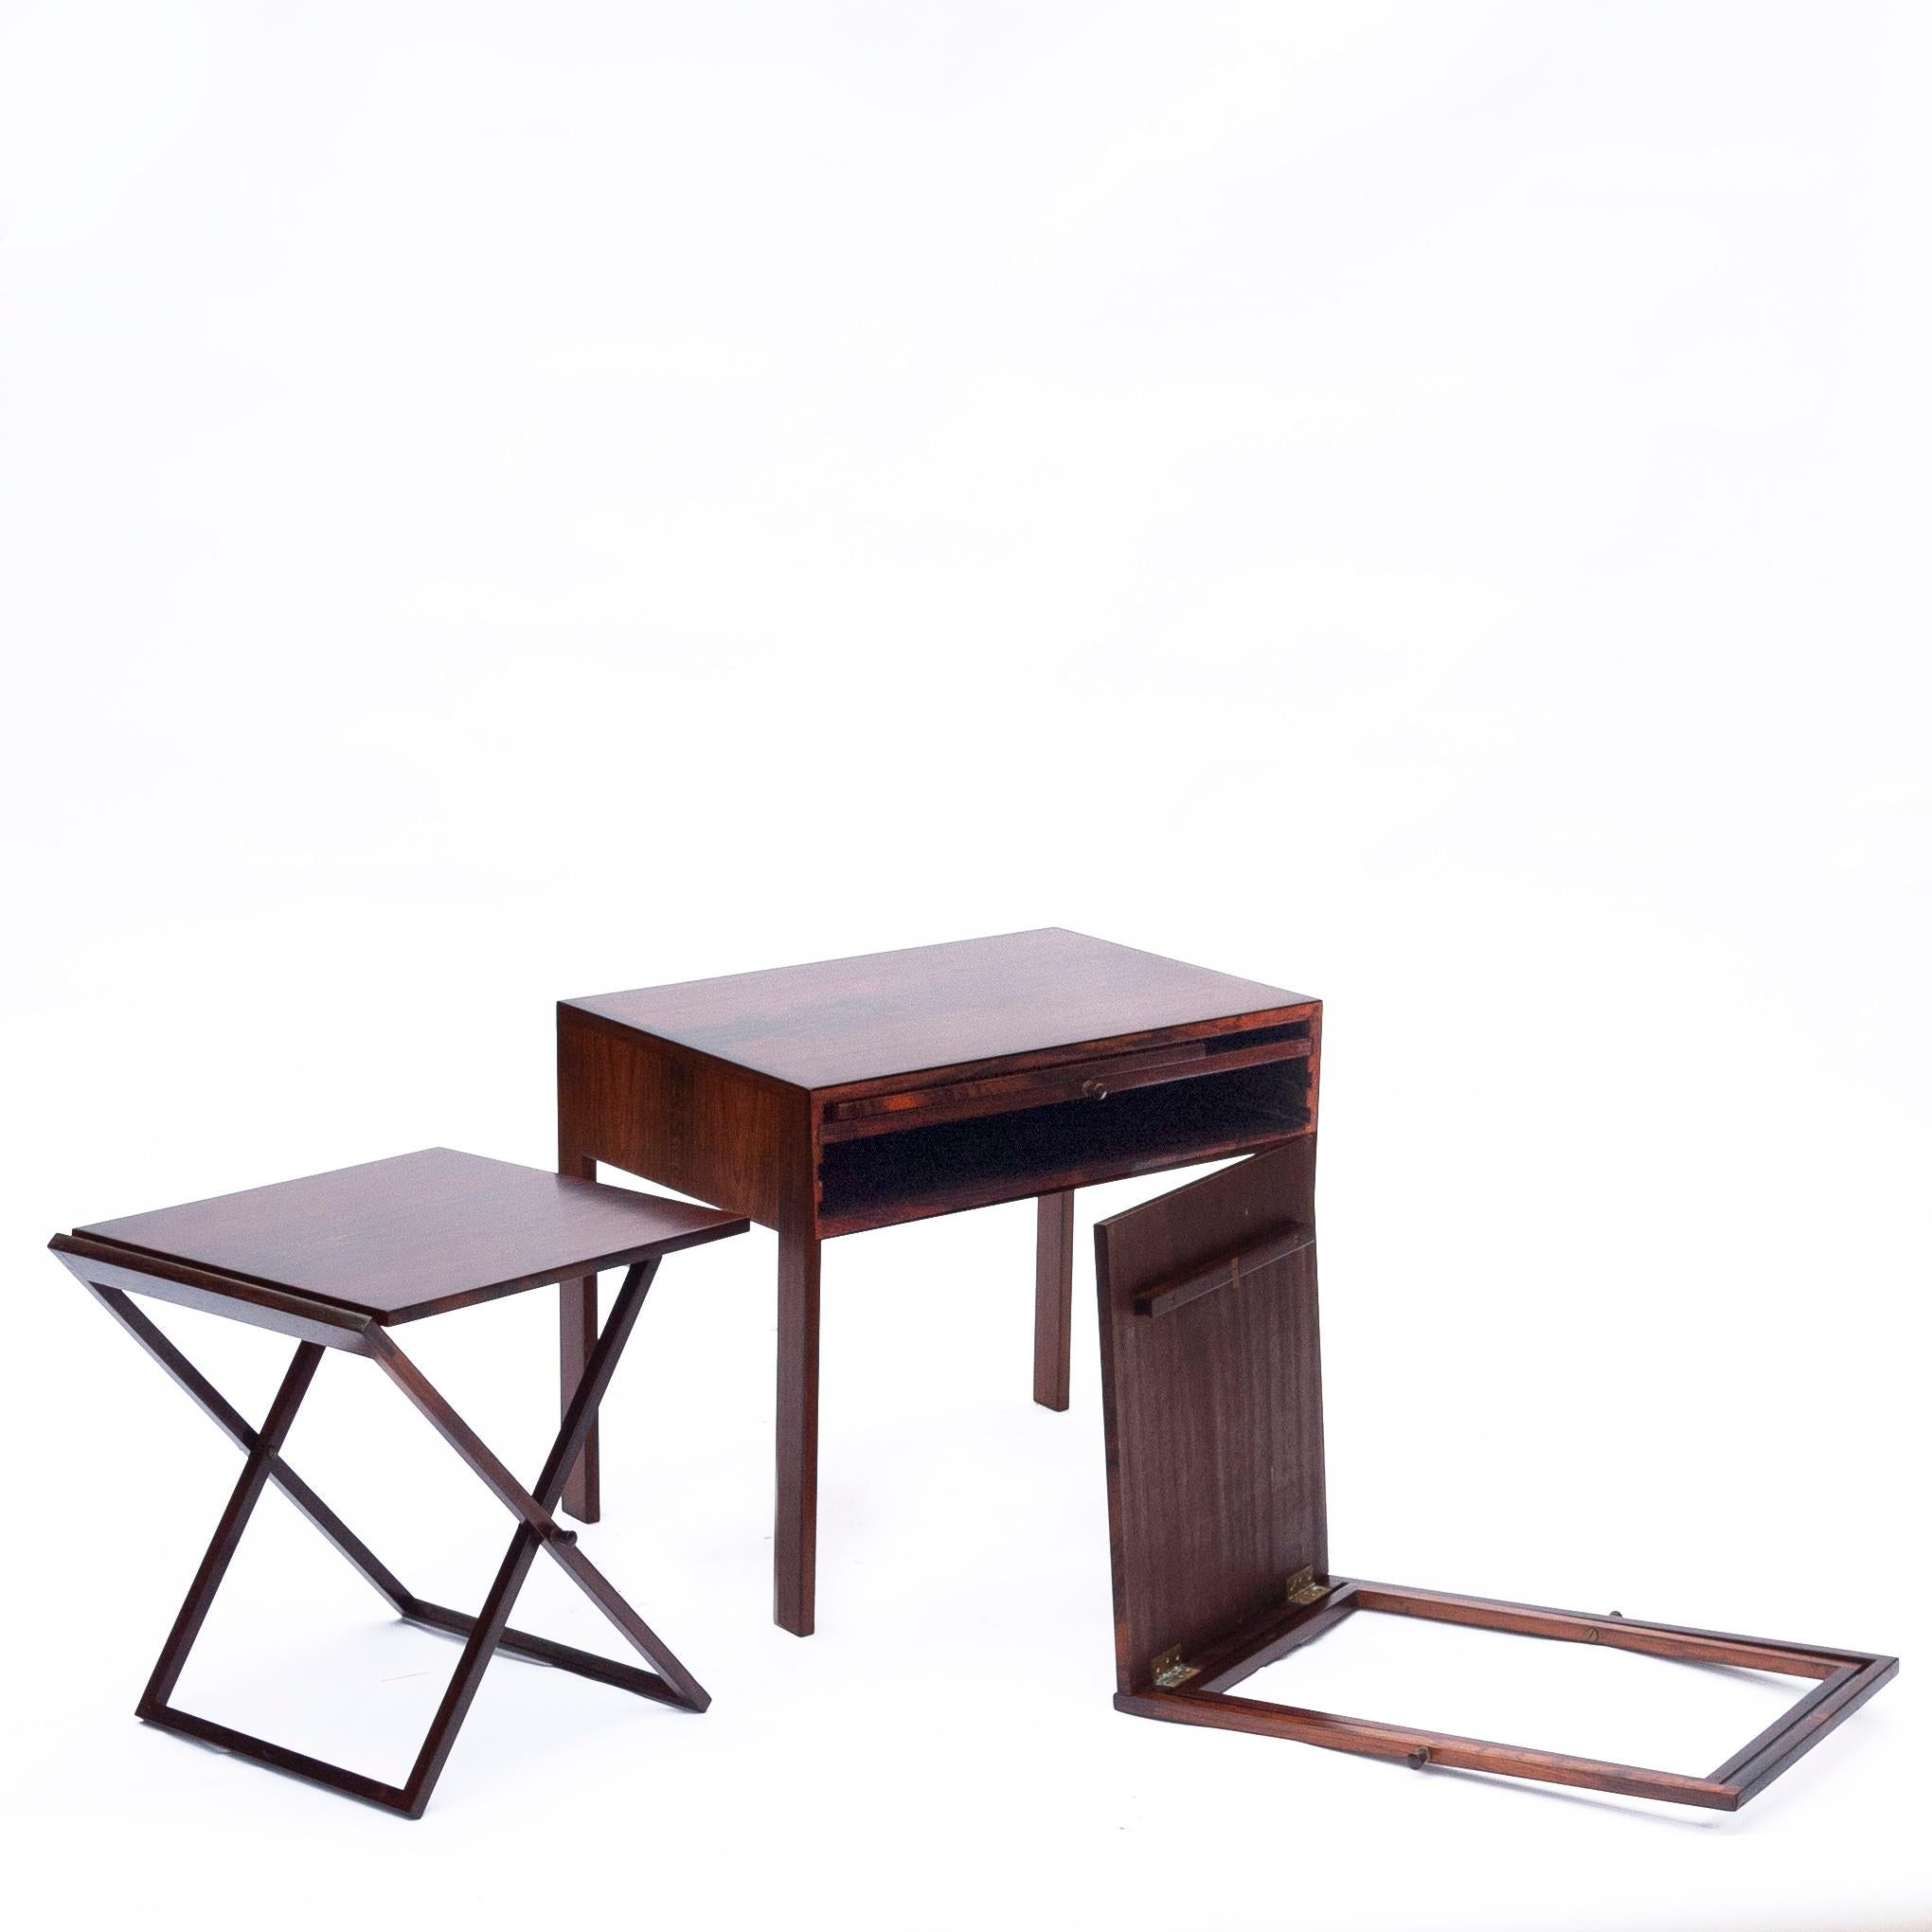 Mid-Century Modern Scandinavian Nesting Tables and Side Table in Rosewood by Illum Wikkelsø, 1960s For Sale